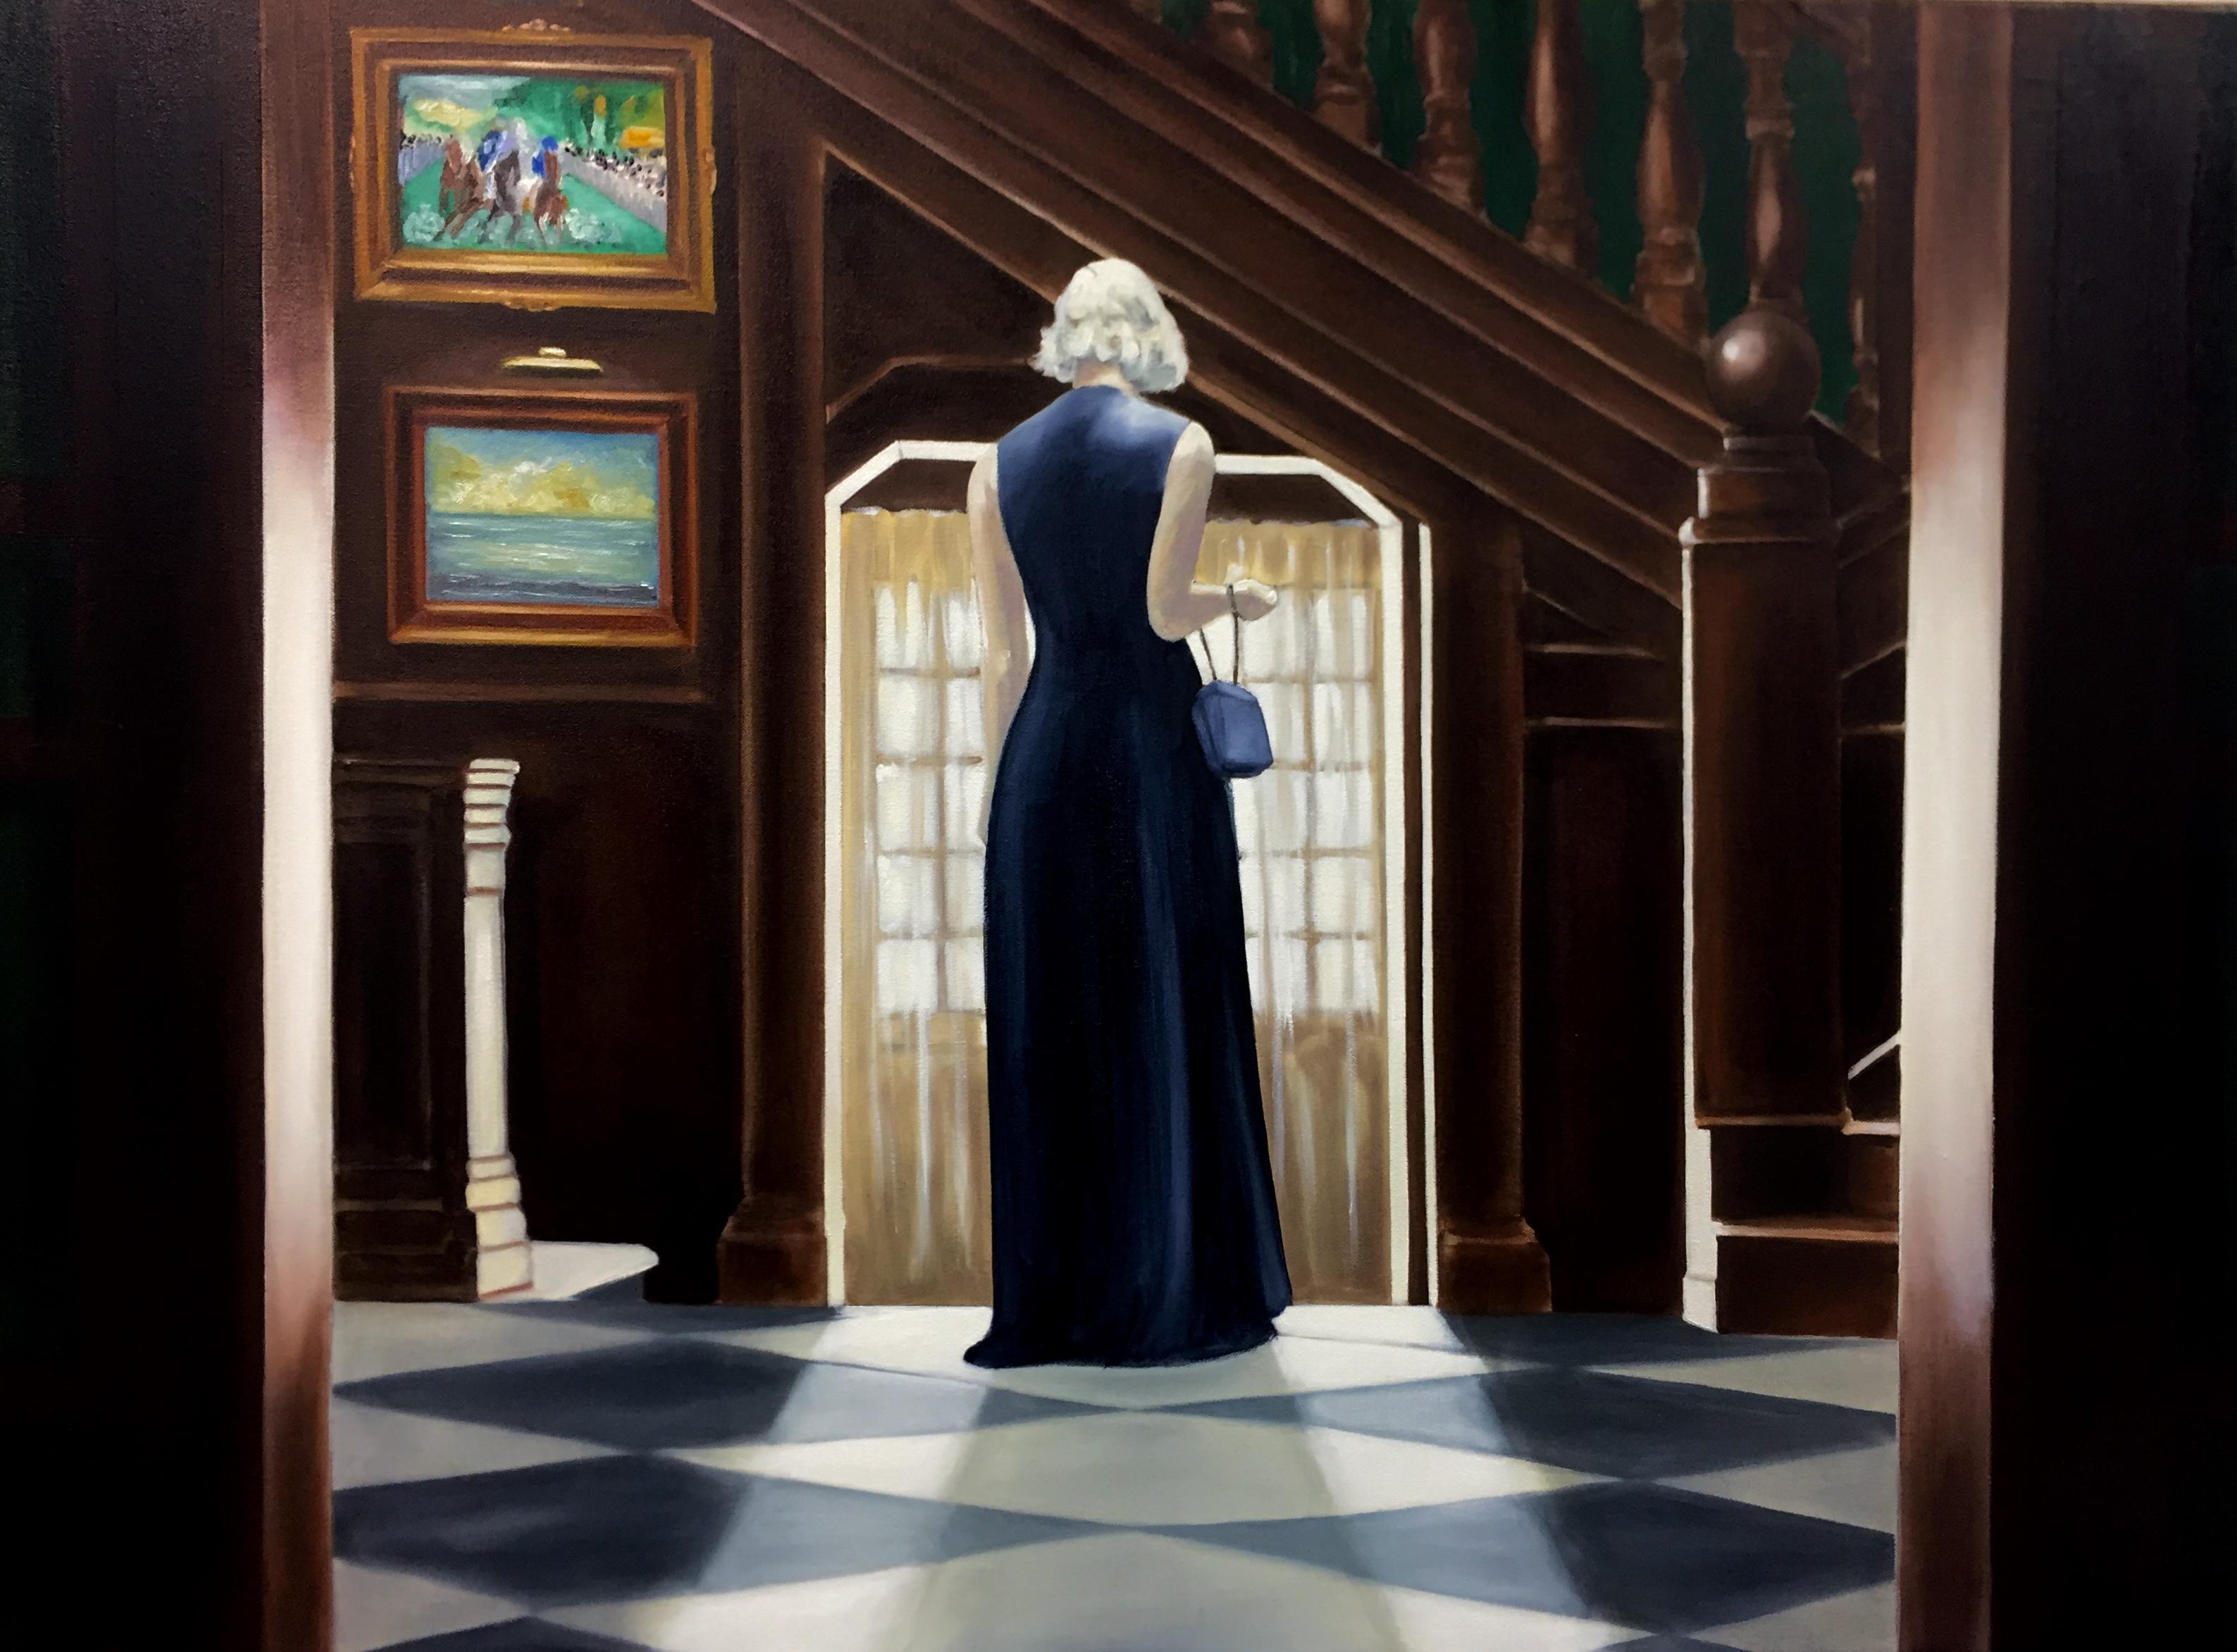 "Marble Cliff Memories" is an oil painting on canvas by the Cuban realist Andres Conde. The artist depicts a solitary figure contemplating the light of a world she is about to enter/exit. The title of the painting is a memory of a hime during a trip